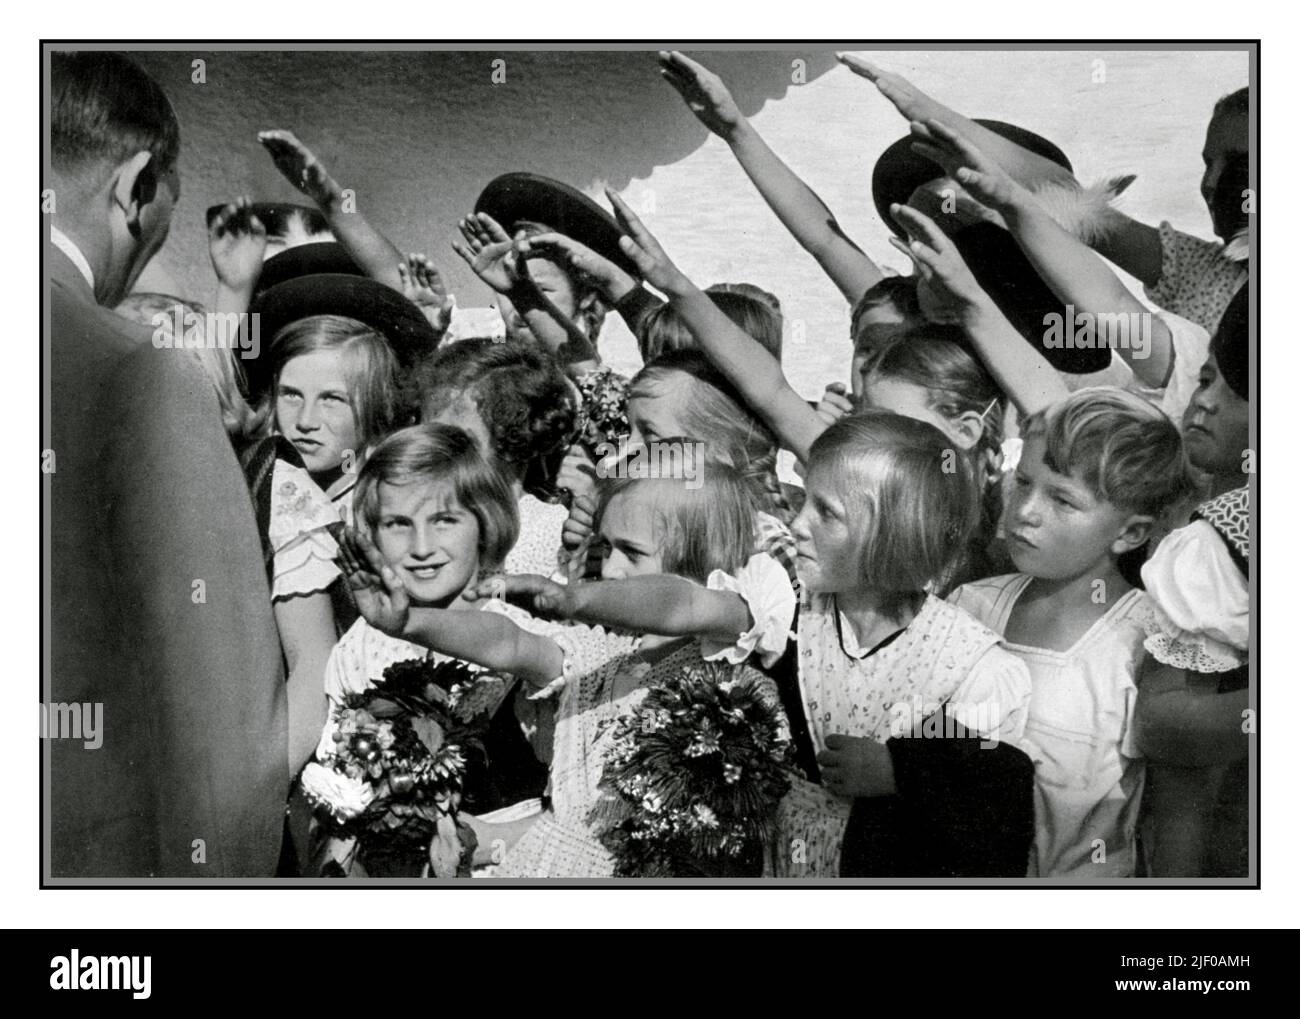 Adolf Hitler 1930s with group of young children with flowers, who are greeting him with the Nazi Heil Hitler salute. Nazi Germany 1936 Stock Photo